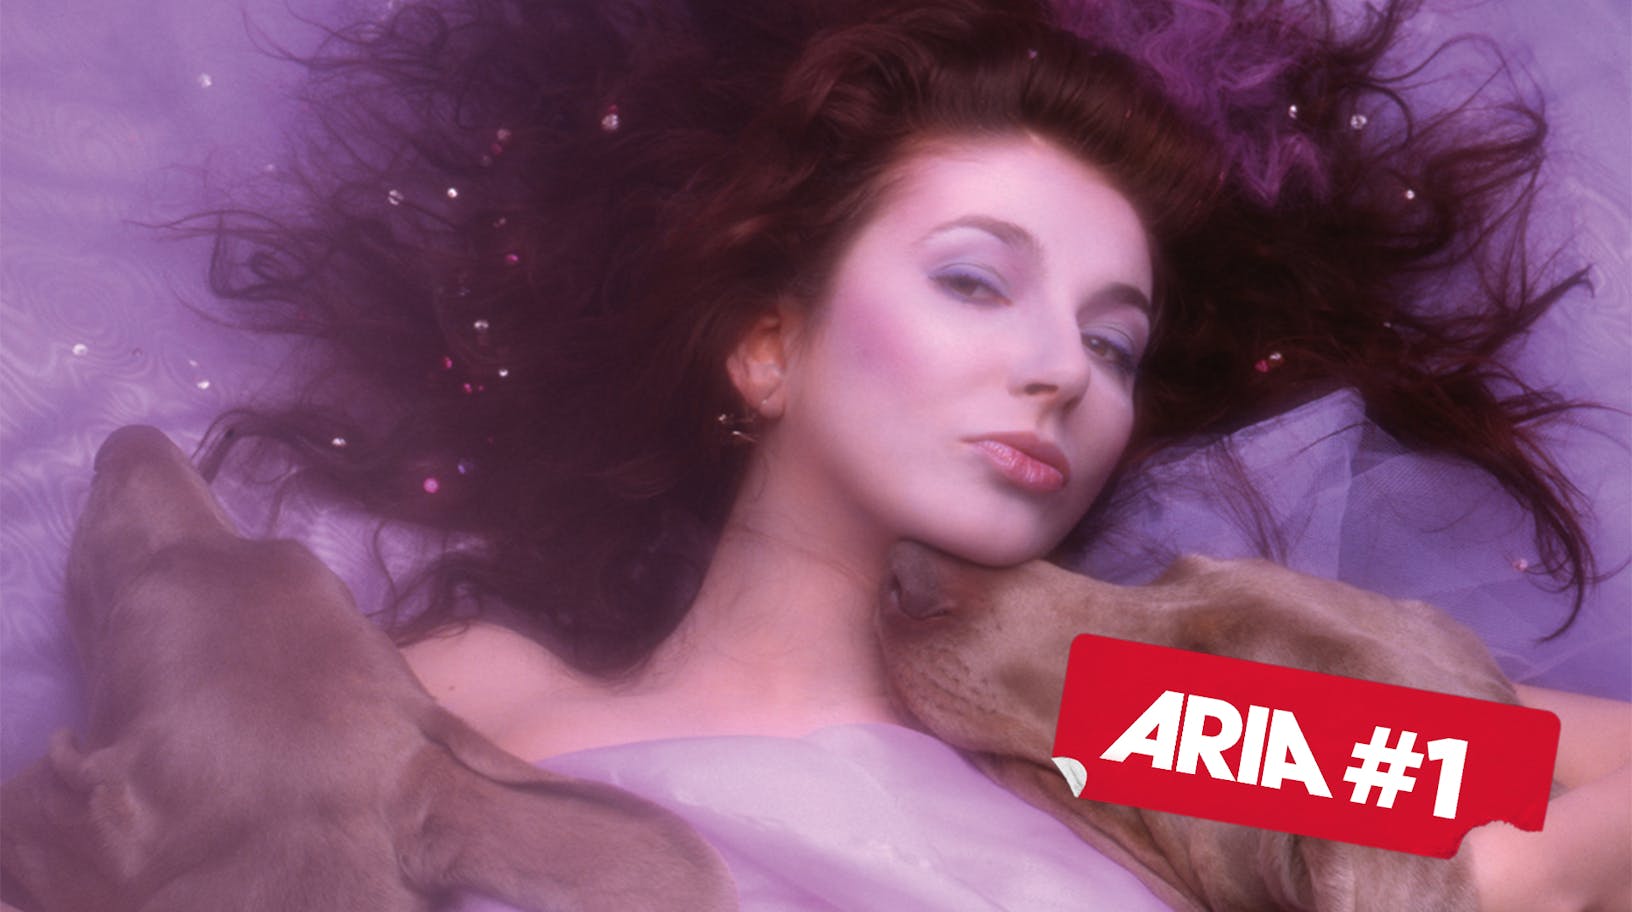 Kate Bush takes out #1 on the Singles Chart